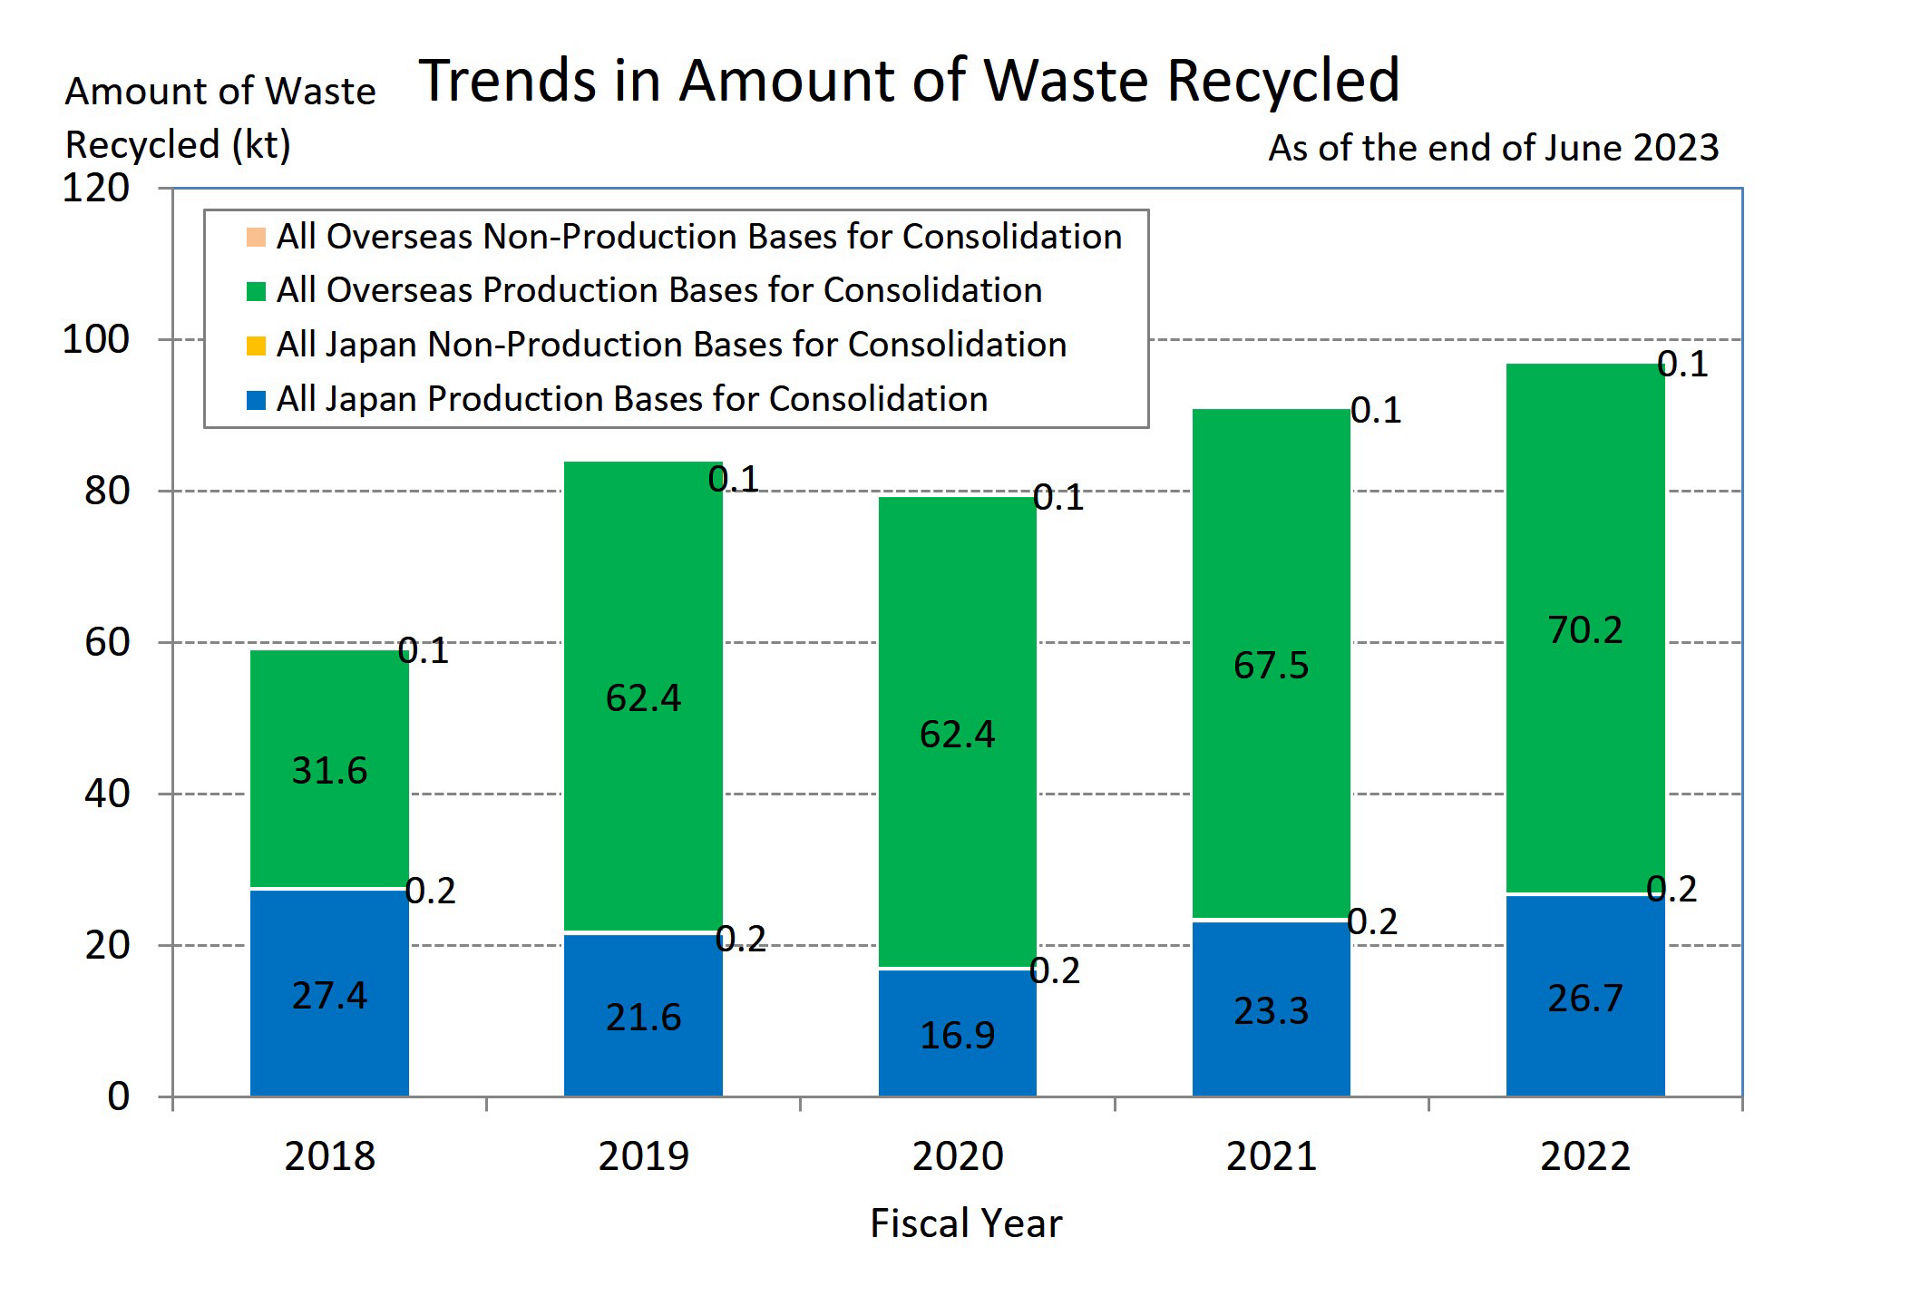 Trends in Amount of Waste Recycled